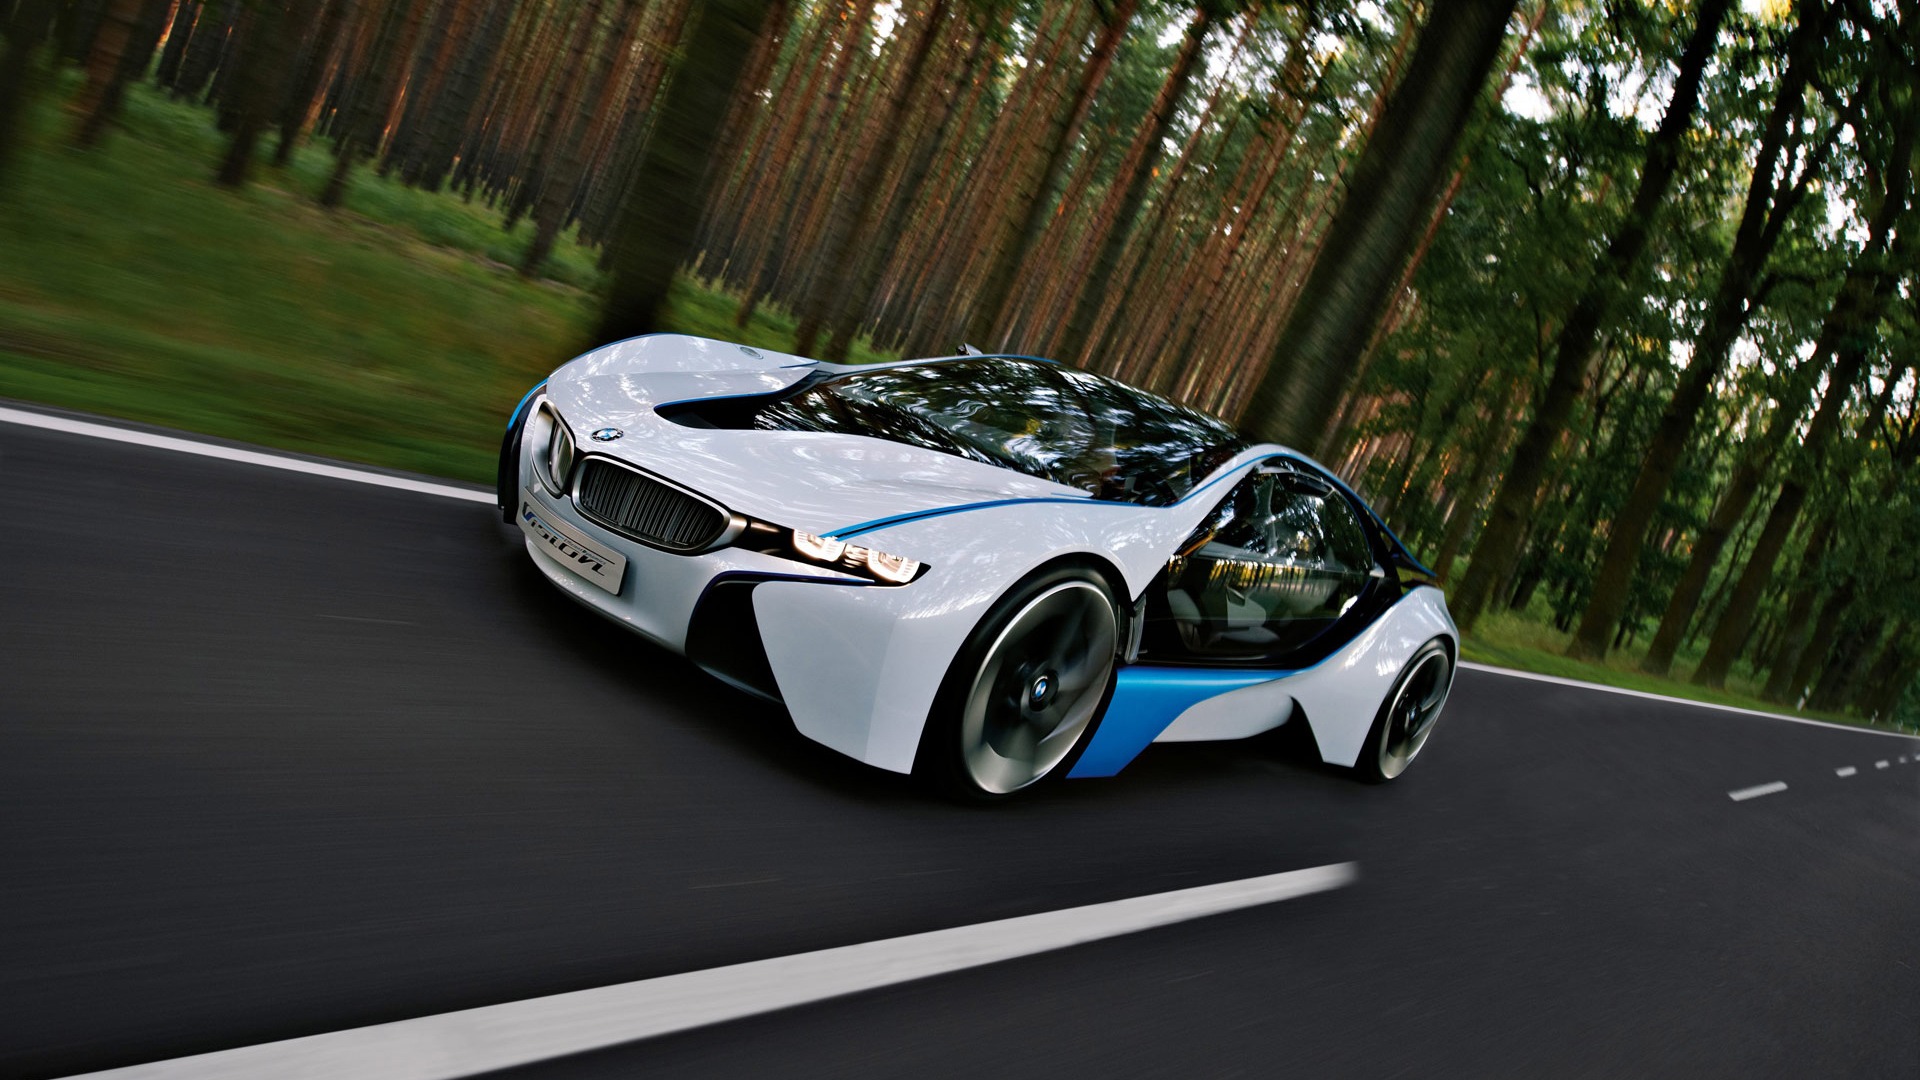 Bmw Vision Wallpaper Cars In Jpg Format For